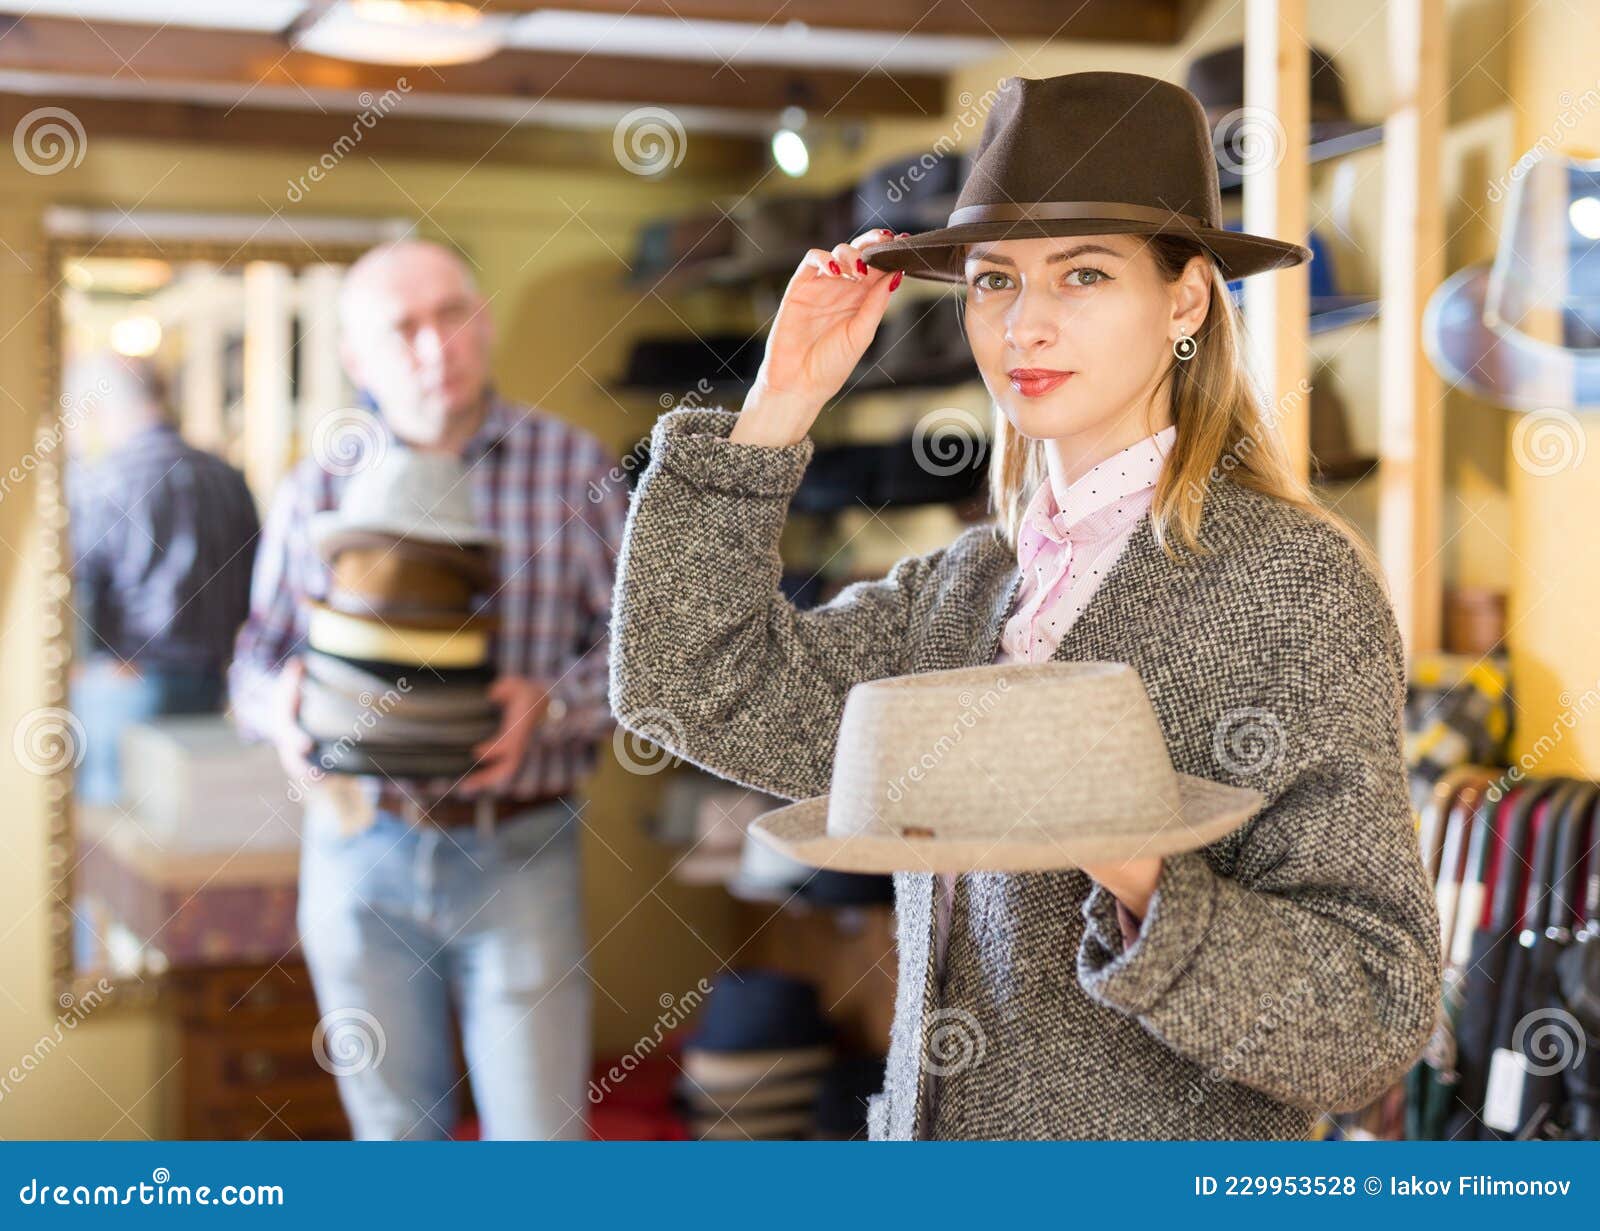 Woman Fitting on Classic Hat in Shop Stock Photo - Image of shopping ...